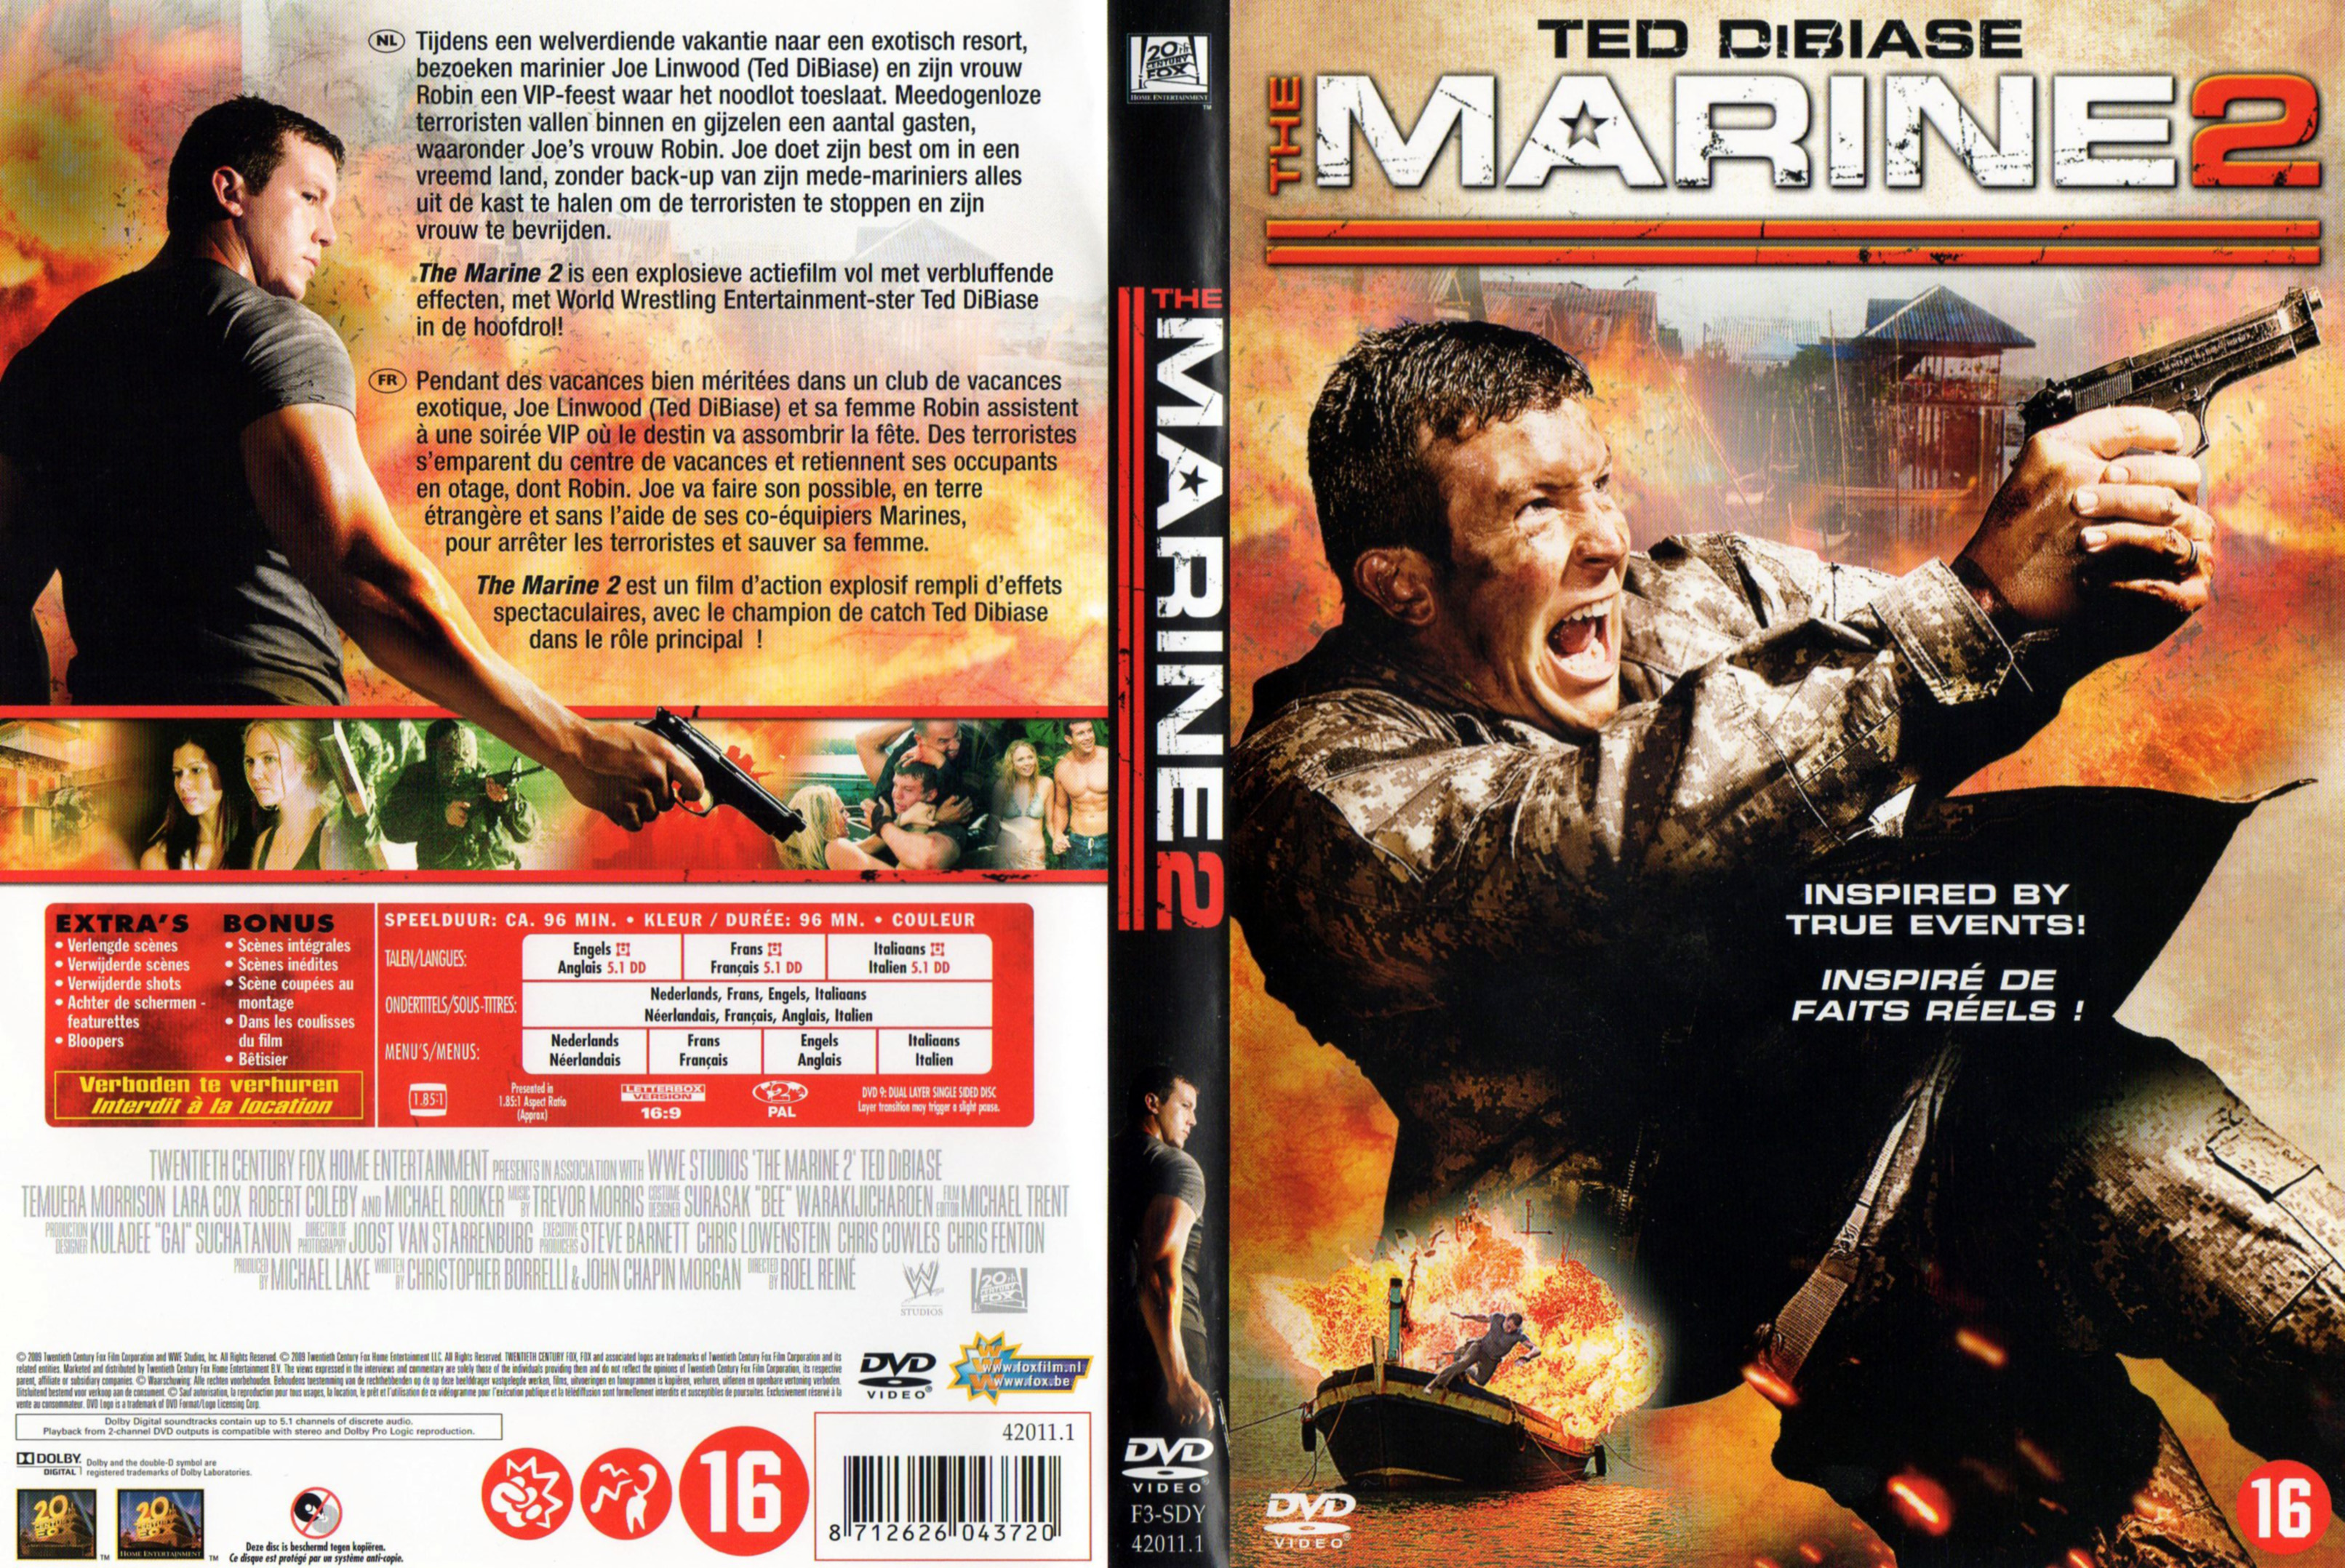 Jaquette DVD The marine 2